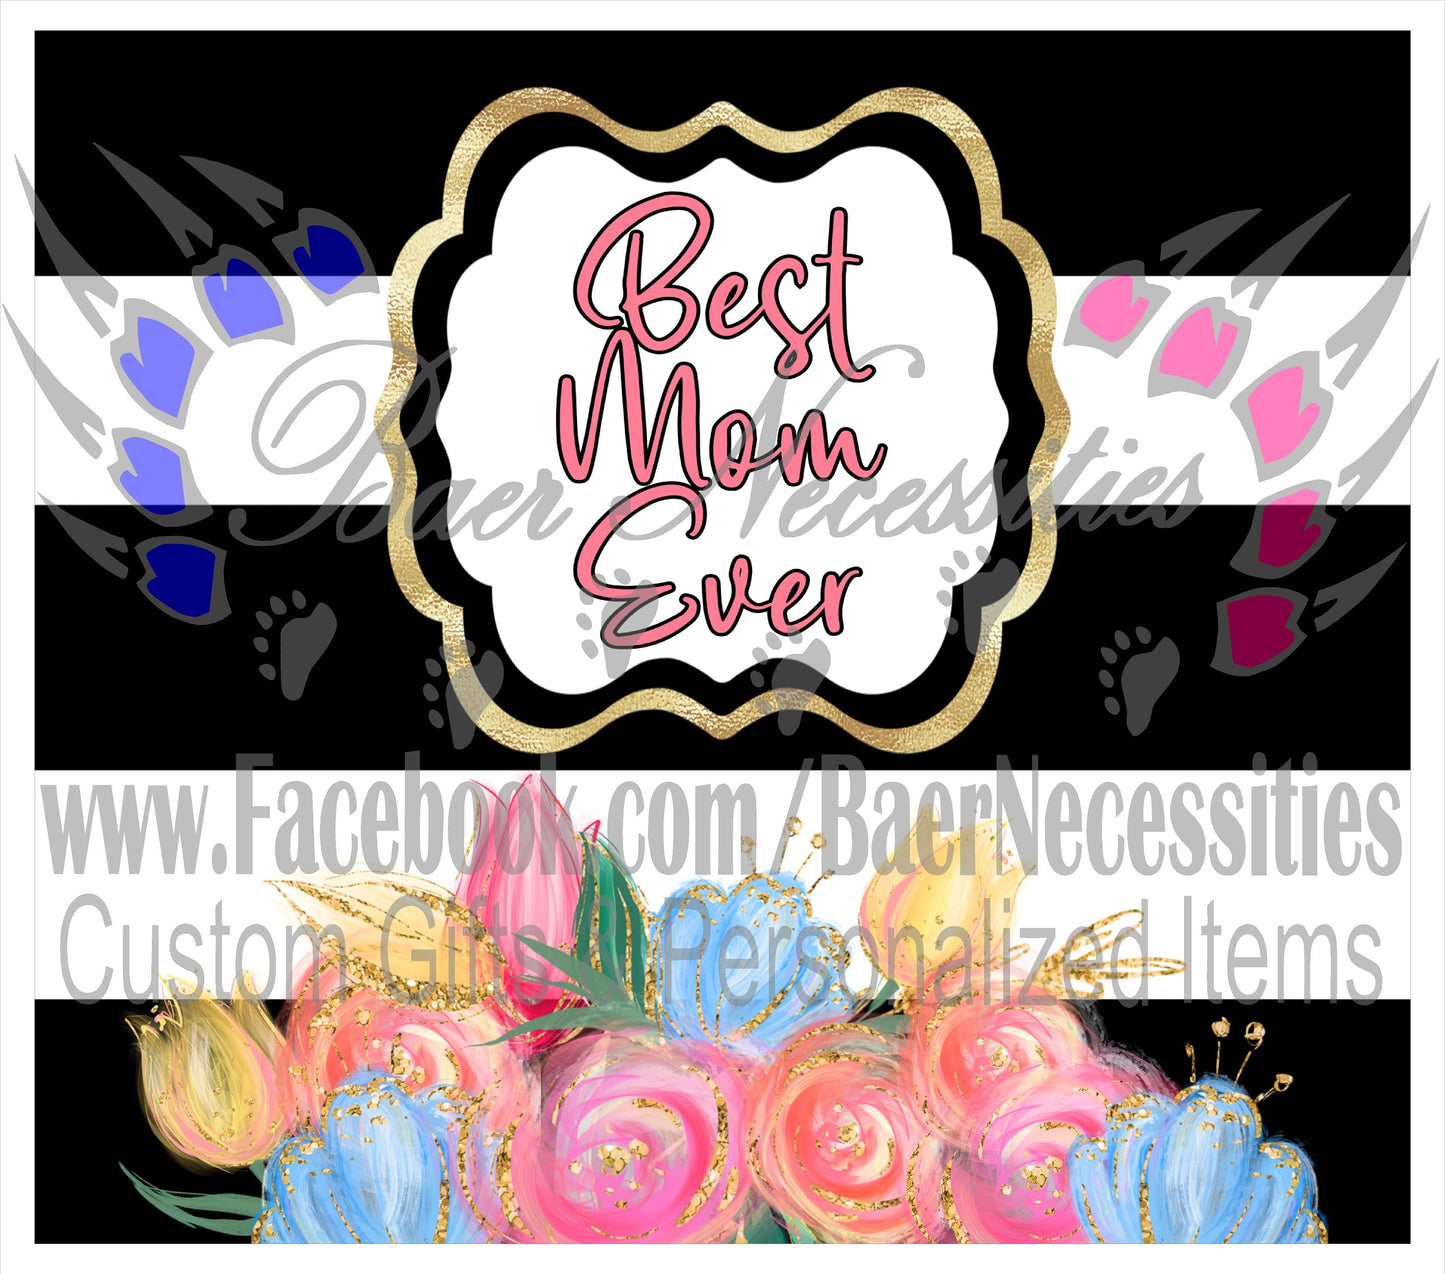 Best Mom Ever Floral - Full Wrap